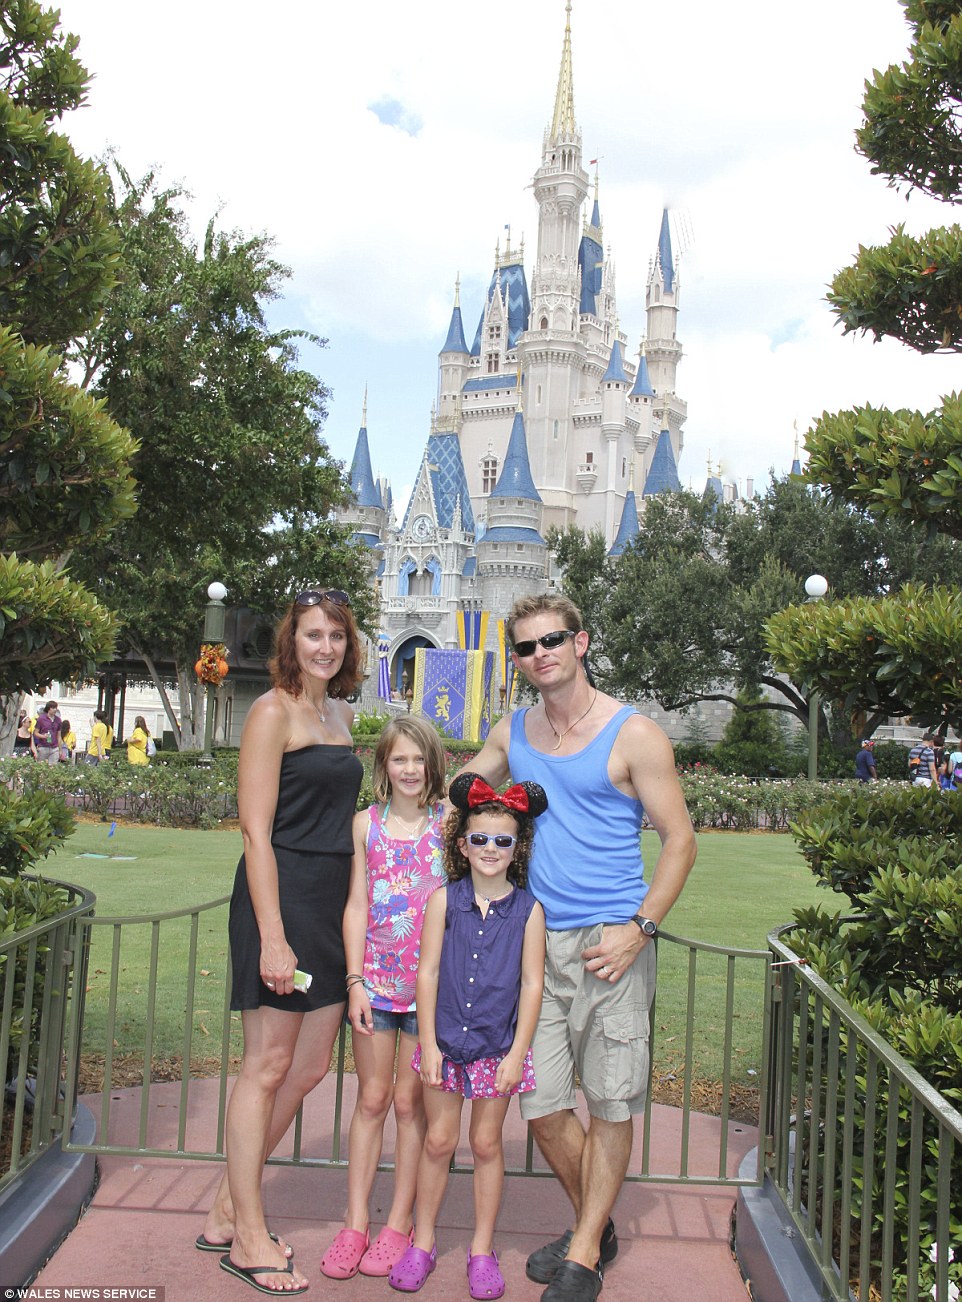 The family visited Disneyland in Florida (pictured) during their once-in-a-lifetime trip which took place from September 2013 to August 2014